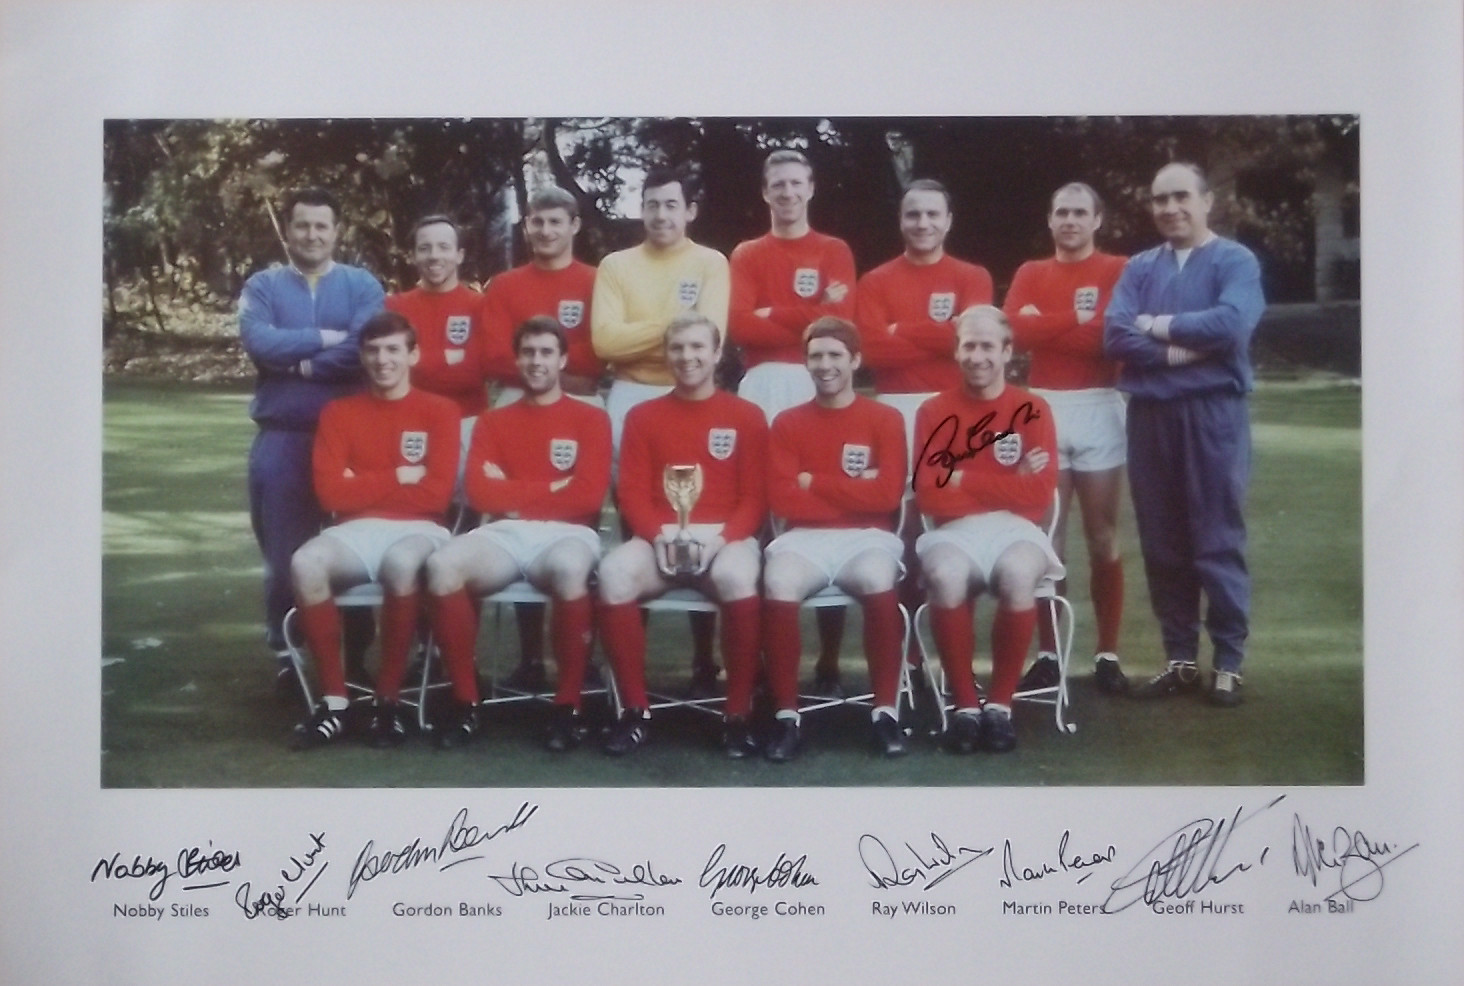 Autograph Football Gift GORDON BANKS ROGER HUNT & MARTIN PETERS Signed 8x6 Inch Mounted Photo Print Pre Printed Signature England World Cup 1966 Ready To Be Framed BOBBY MOORE